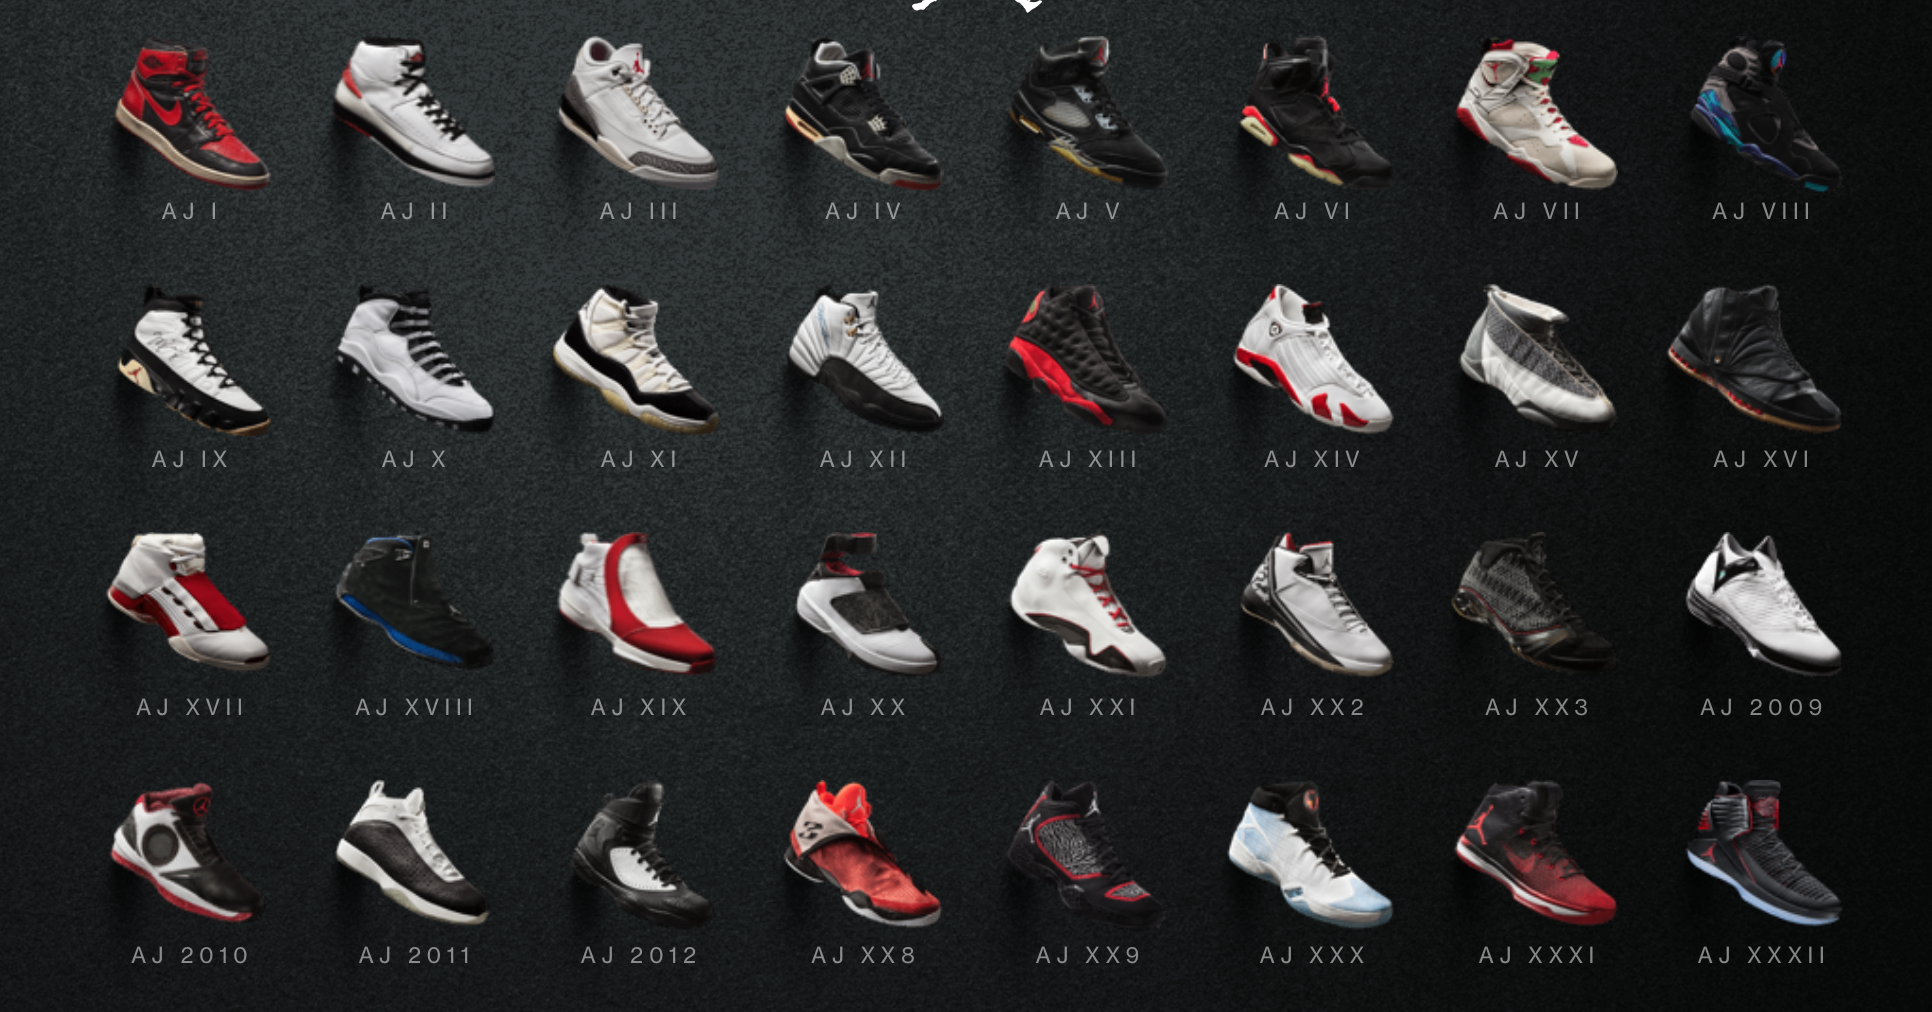 who is jordan brand owned by